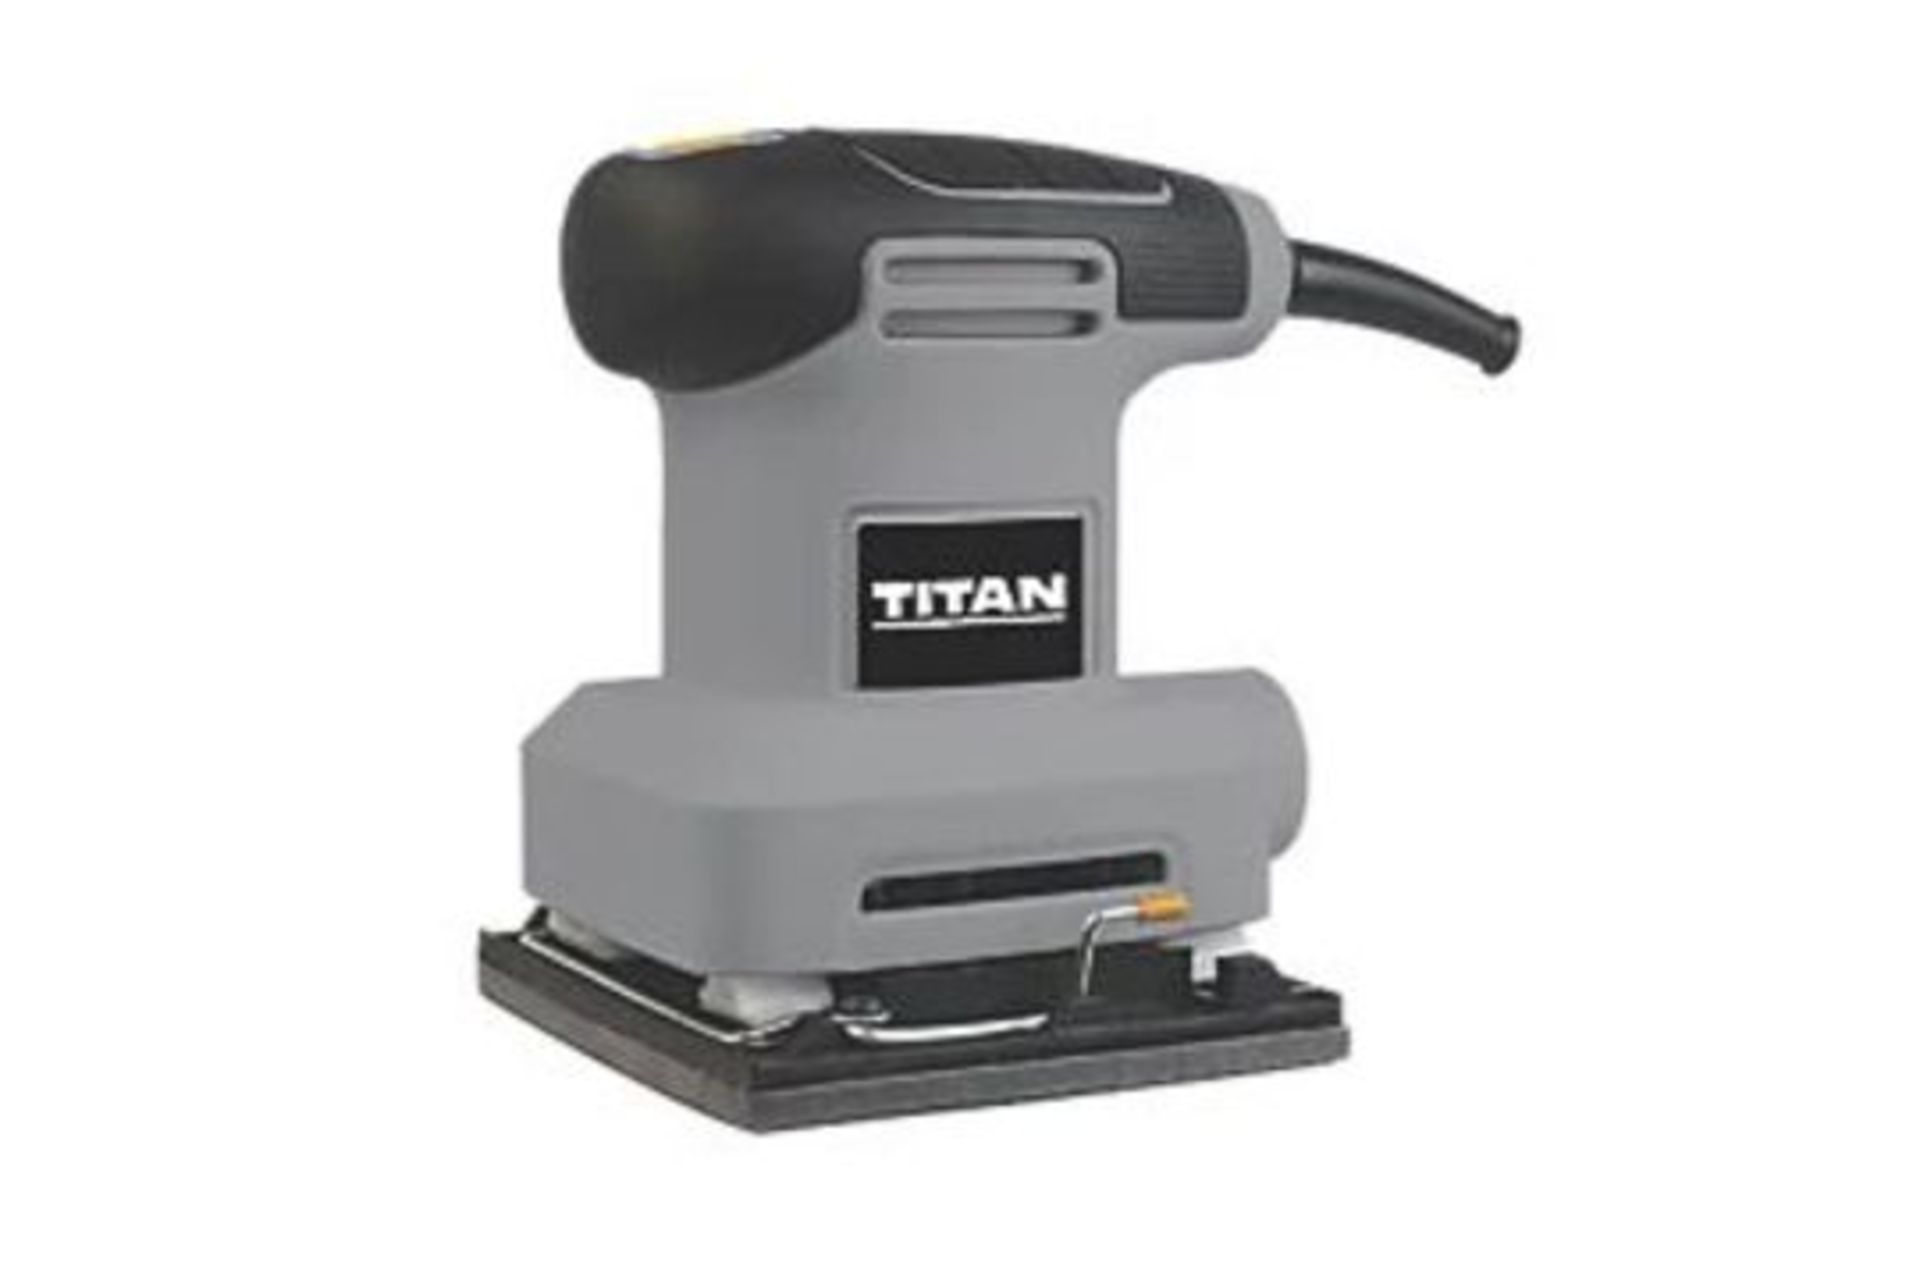 TITAN ELECTRIC 1/4 SHEET SANDER 240V. - R14.9. Sheet sander with dust extraction facility and soft-